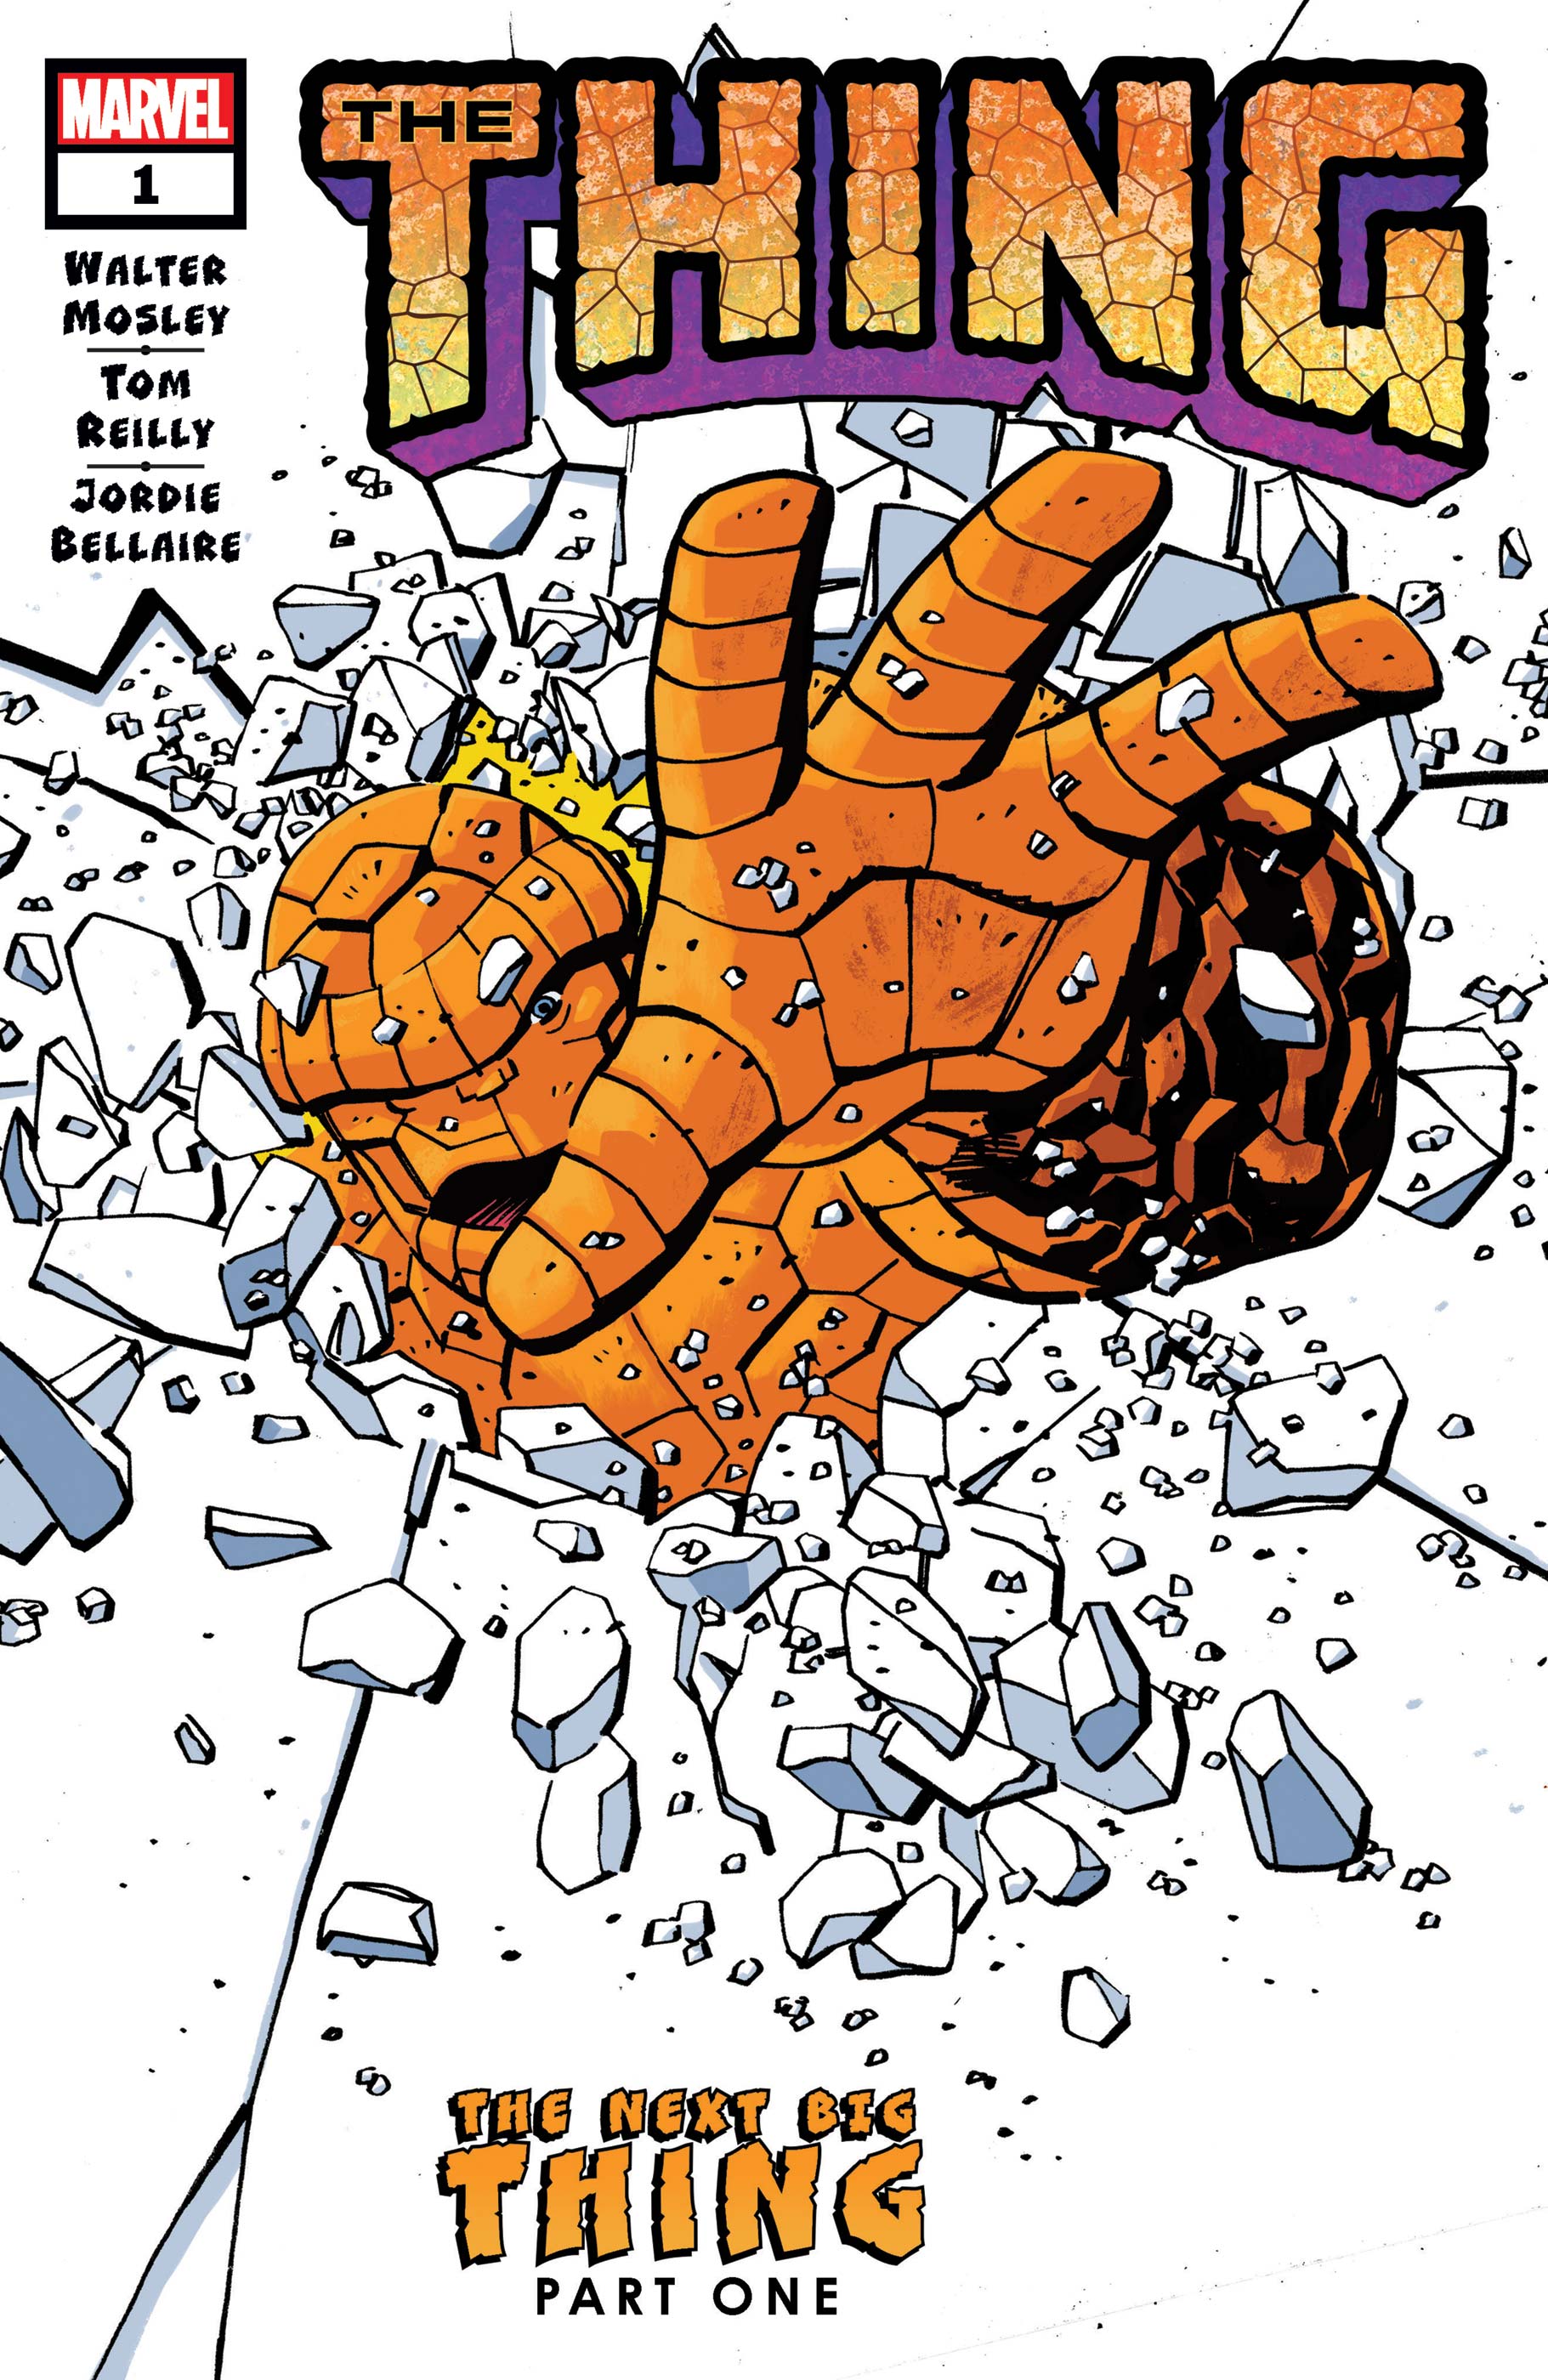 The Thing (2021) #1